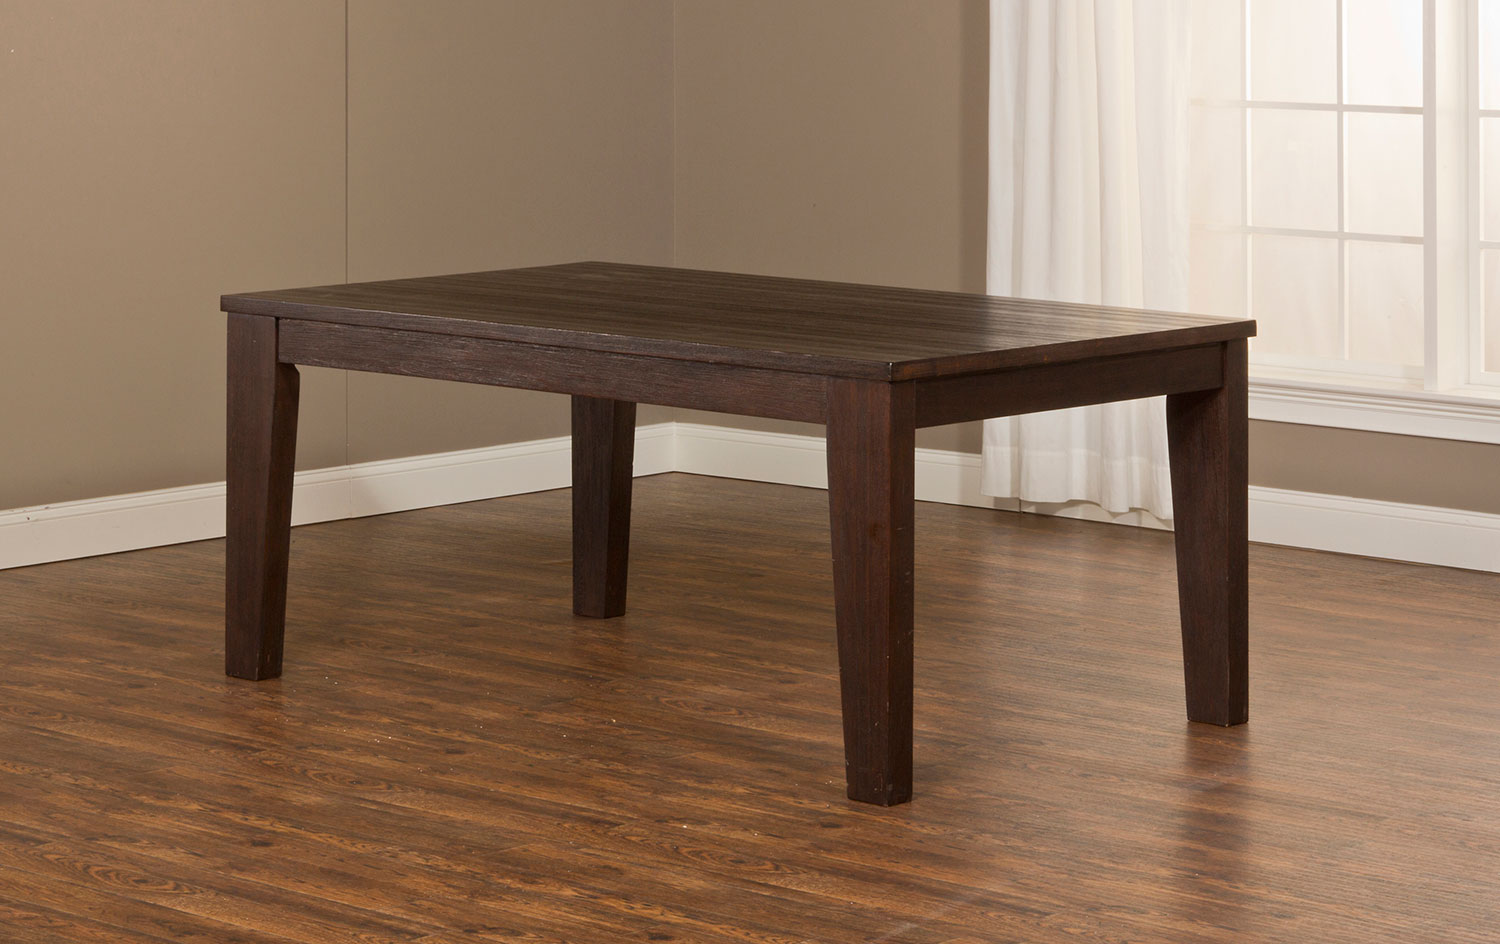 Hillsdale Brooklawn Dining Table - Smoke Brown